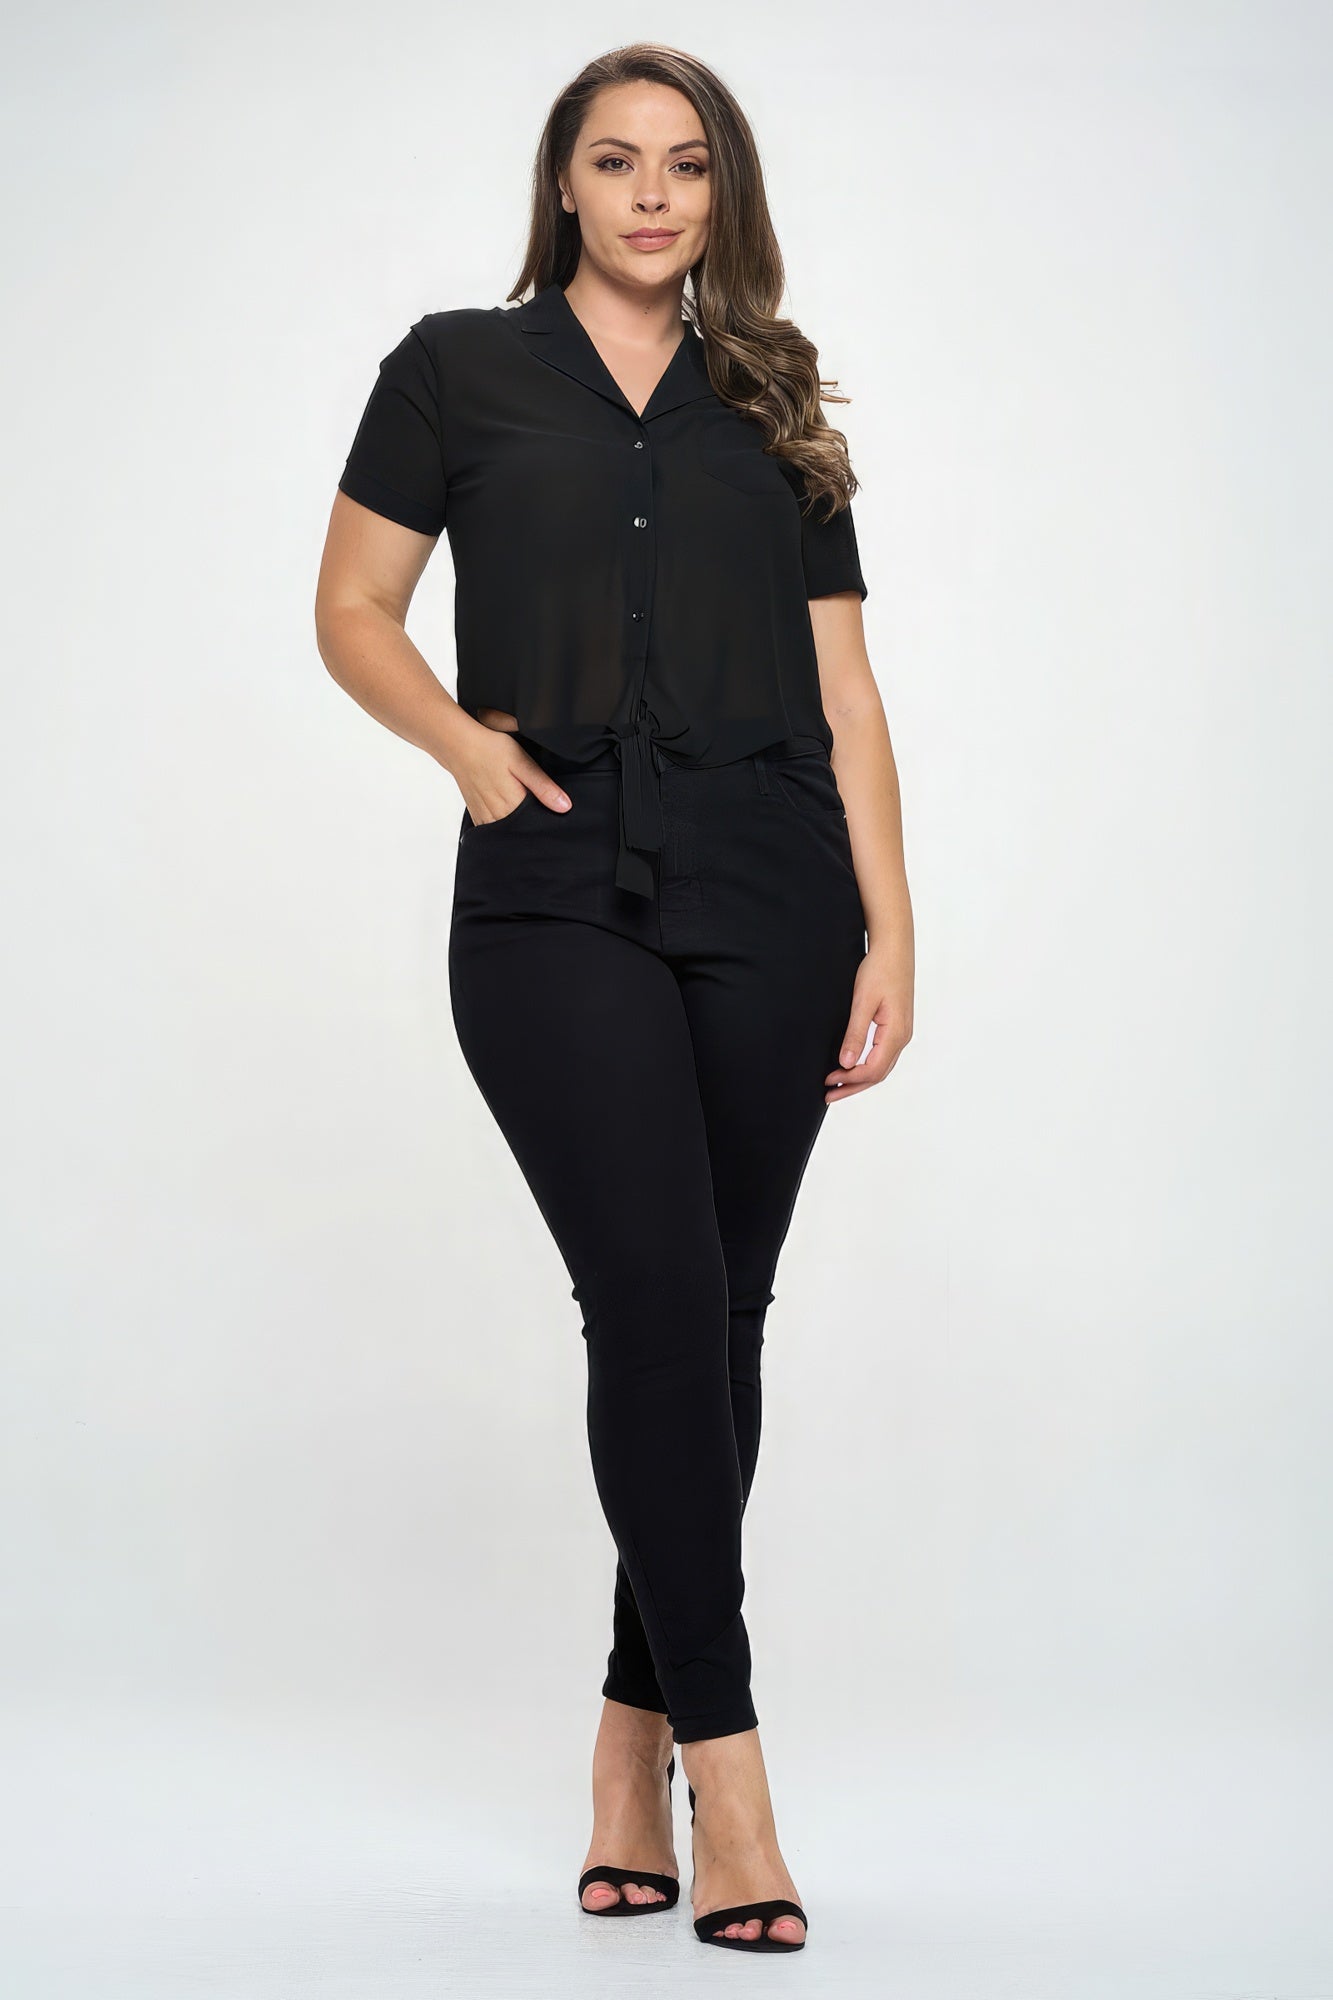 THE ABIGAIL Plus Solid Chiffon Button Down Tie Front Short Sleeve Top